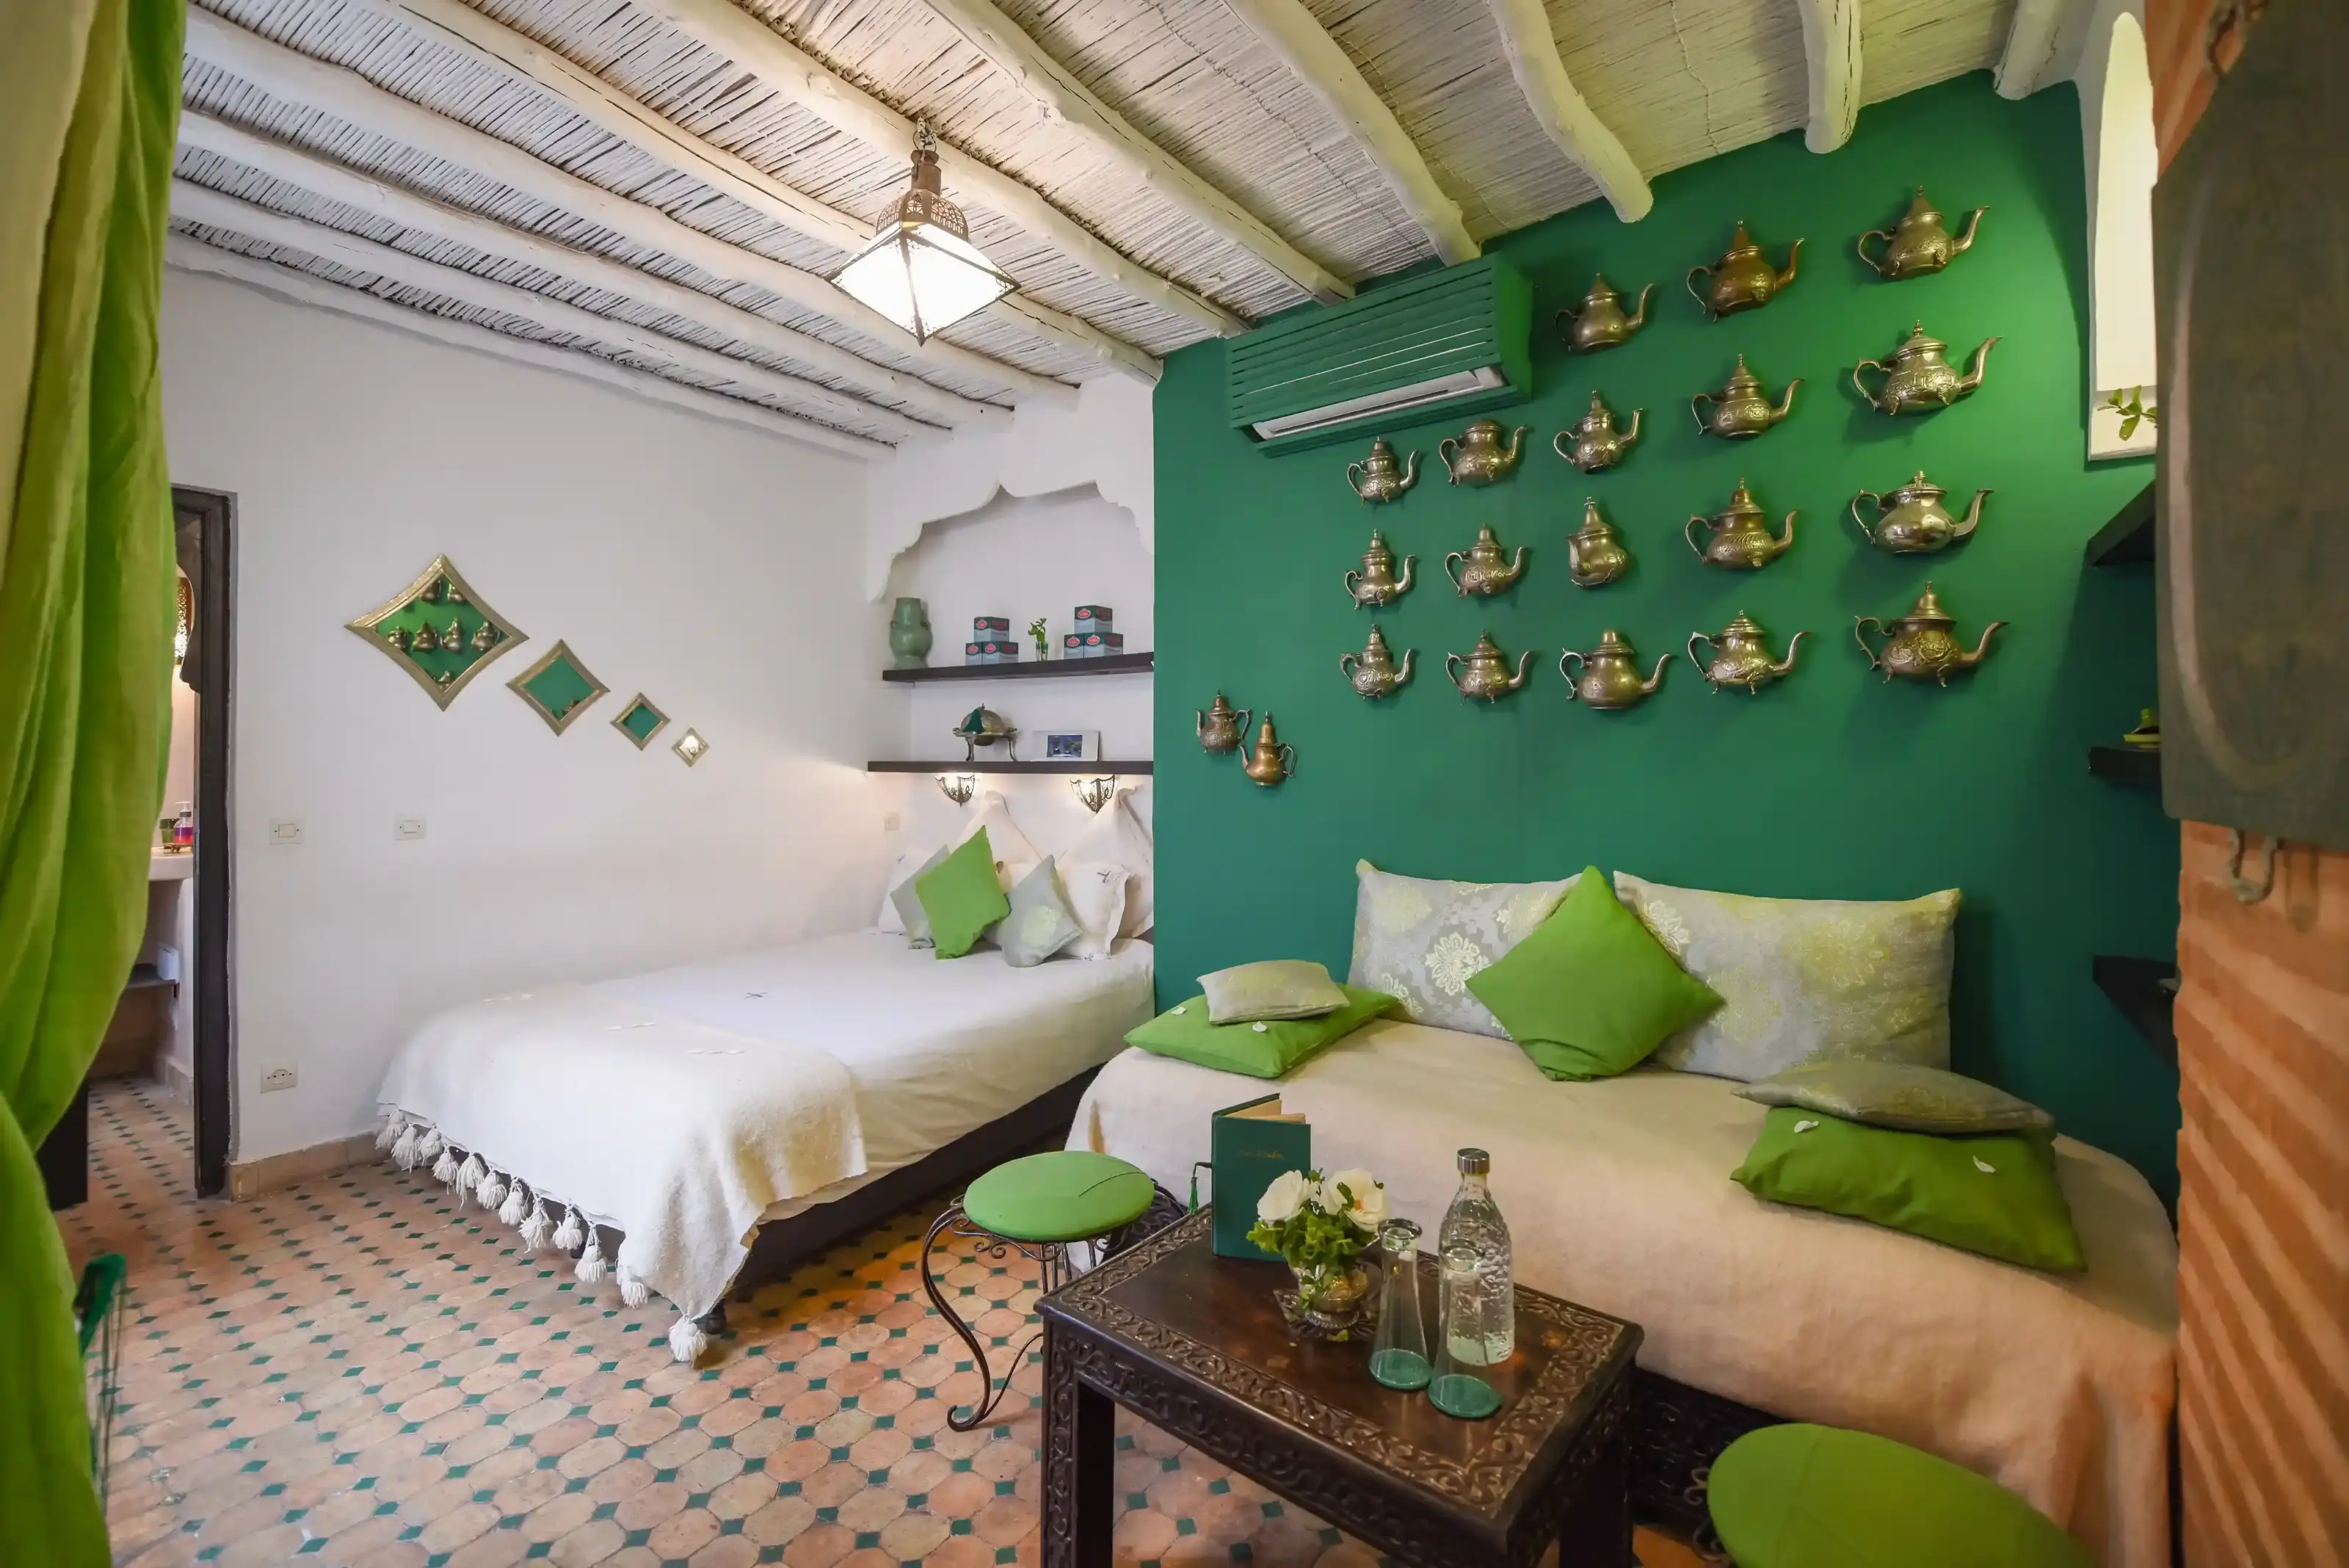 The double deluxe rooms of our guesthouse are equipped with queen-size double beds